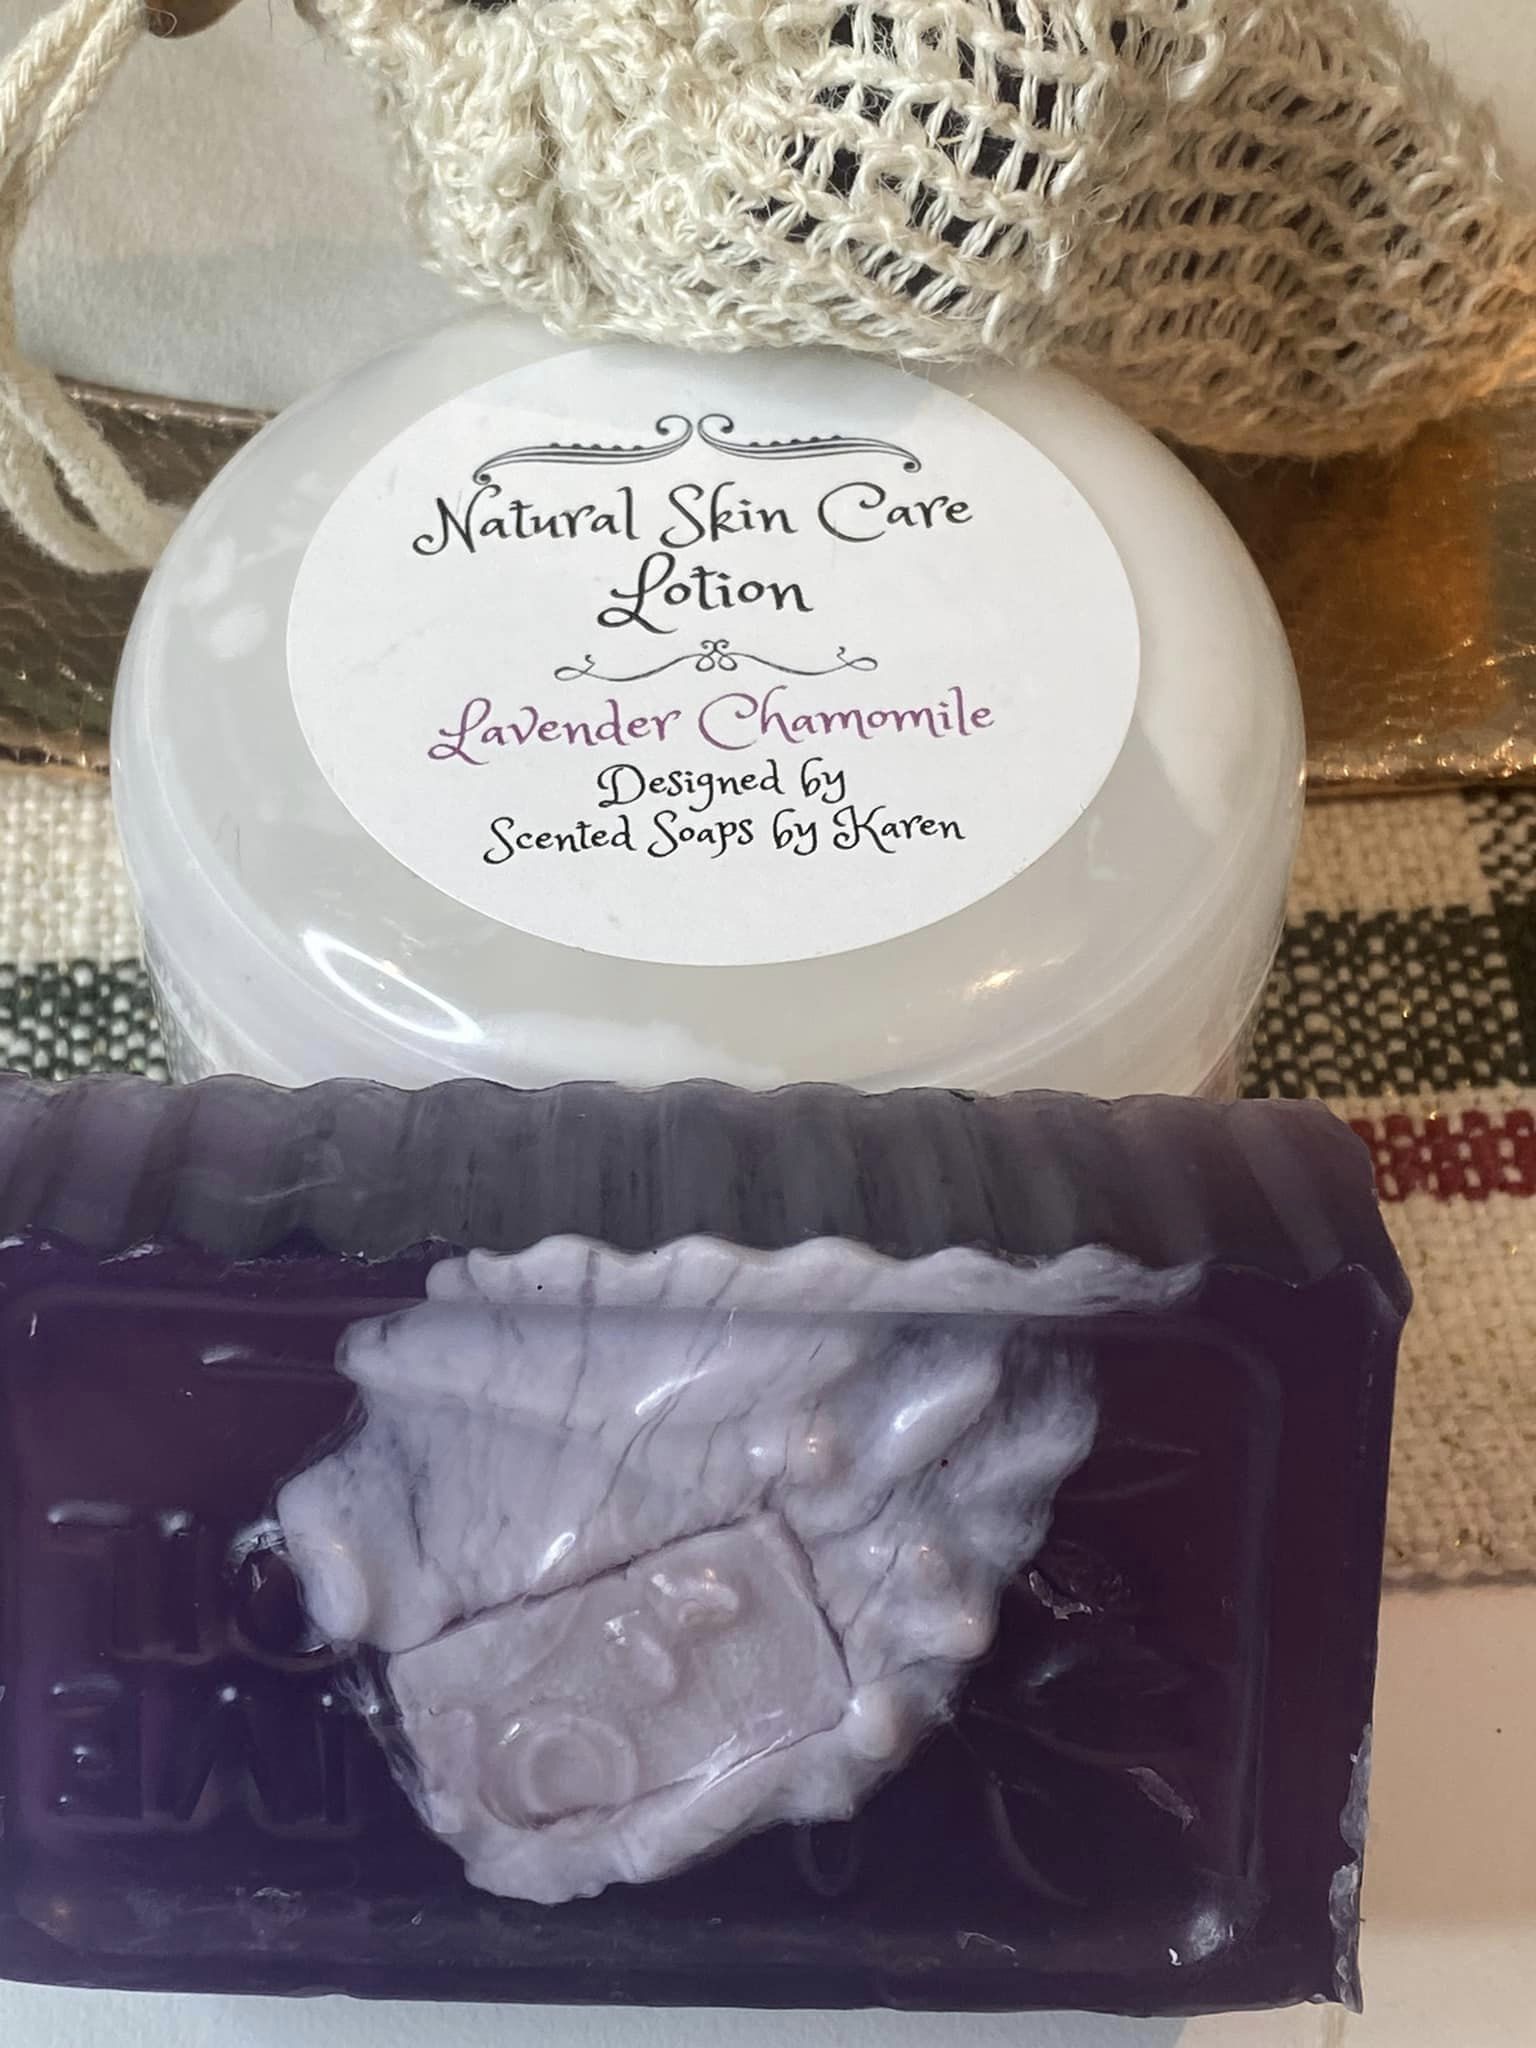 Lavender and Chamomile Lotion. Matching Soap. Sisal bag for easy exfoliating. All items are included in a zipped bag wrapped with ribbon.